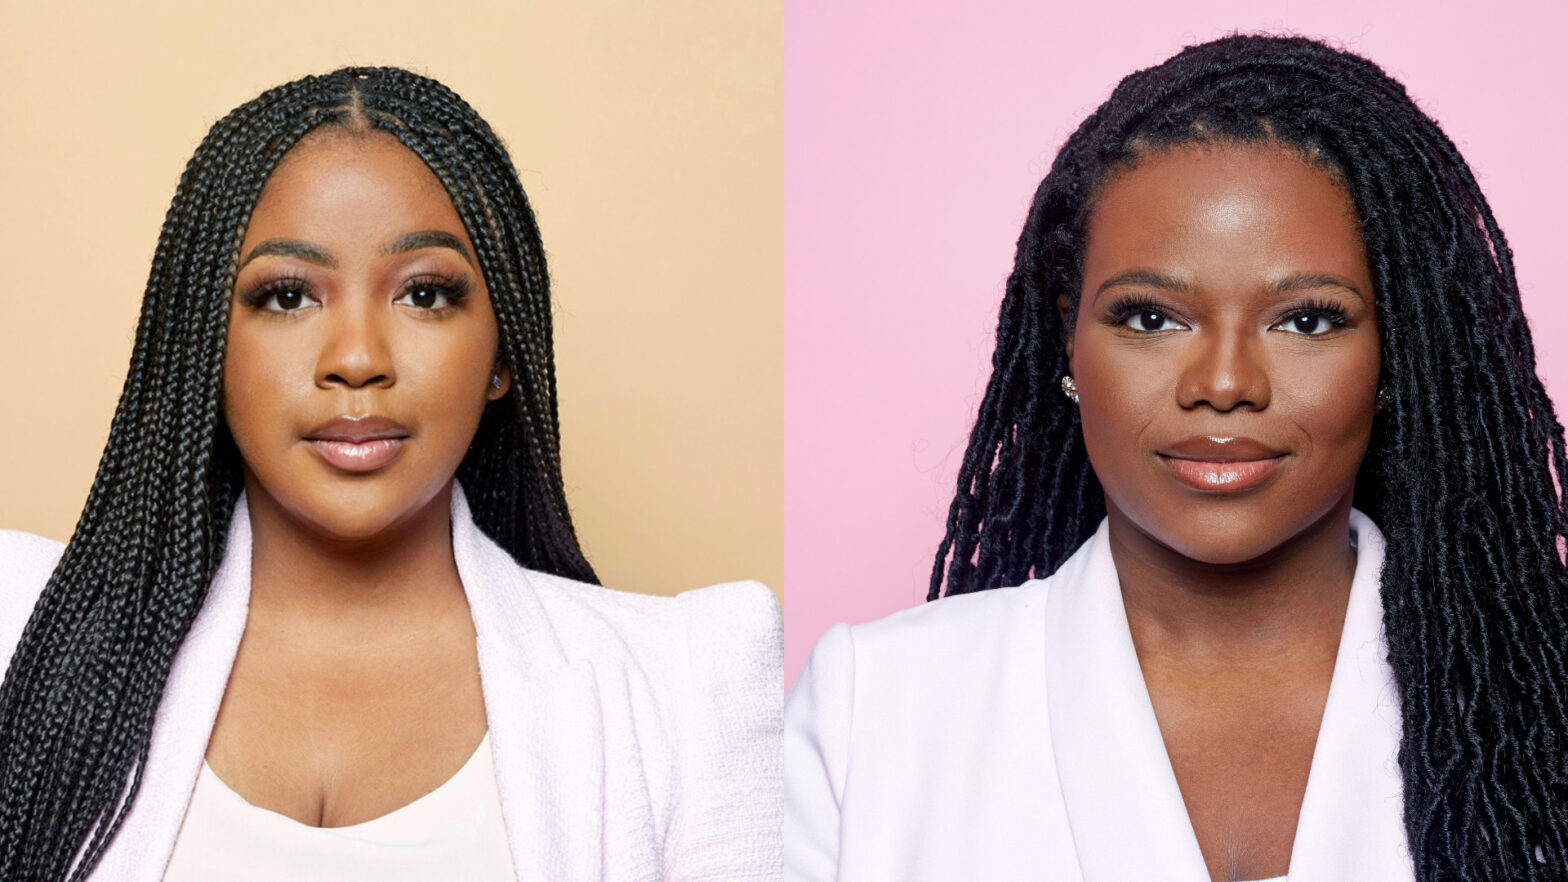 These Founders Are Behind A Digital Platform That Aims To Connect Black Women To Culturally Sensitive Providers